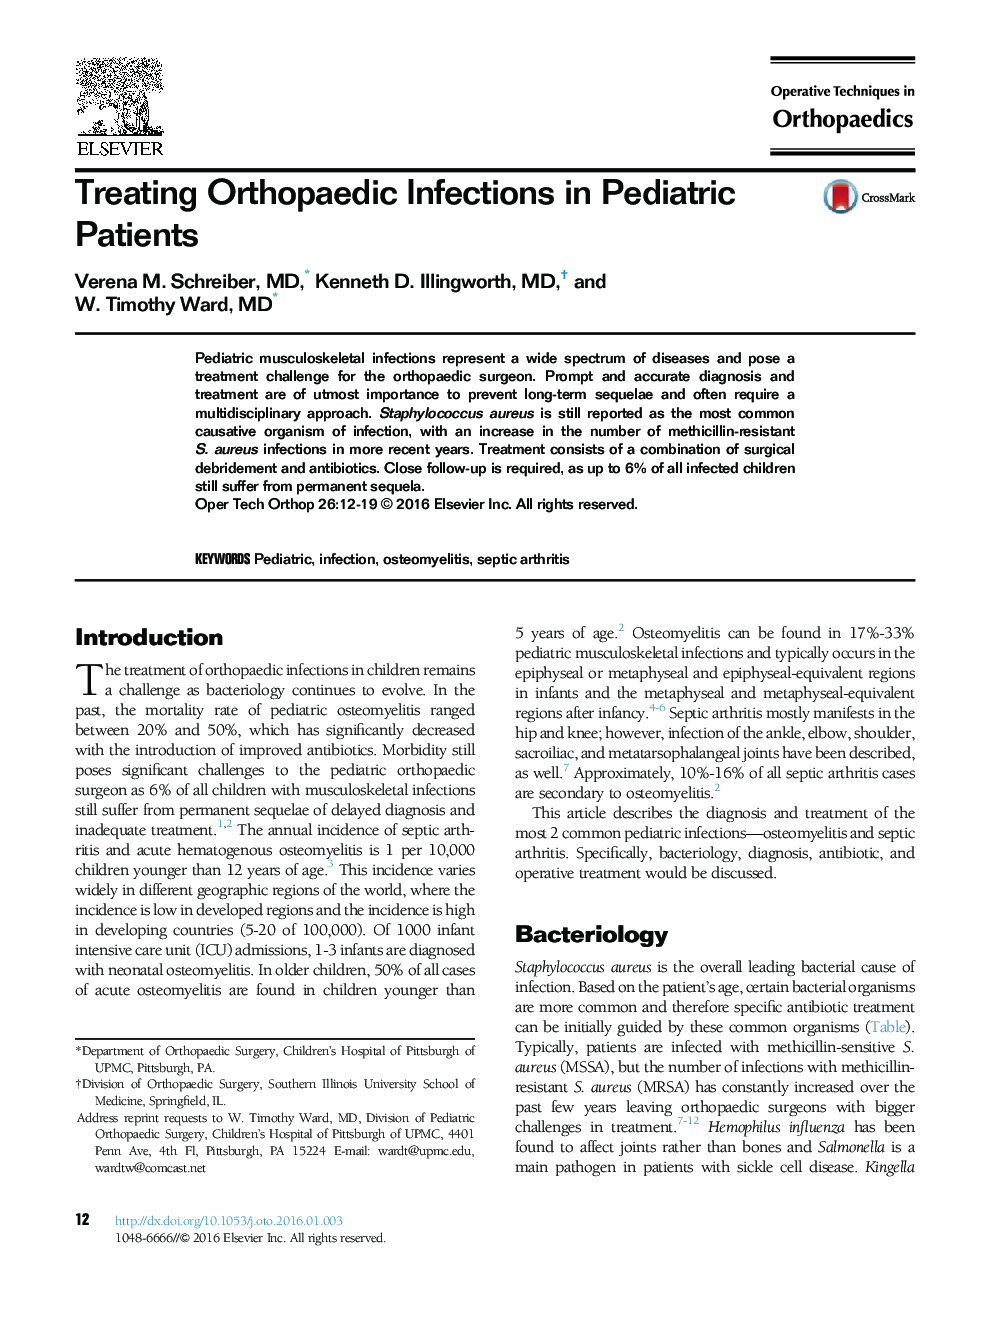 Treating Orthopaedic Infections in Pediatric Patients